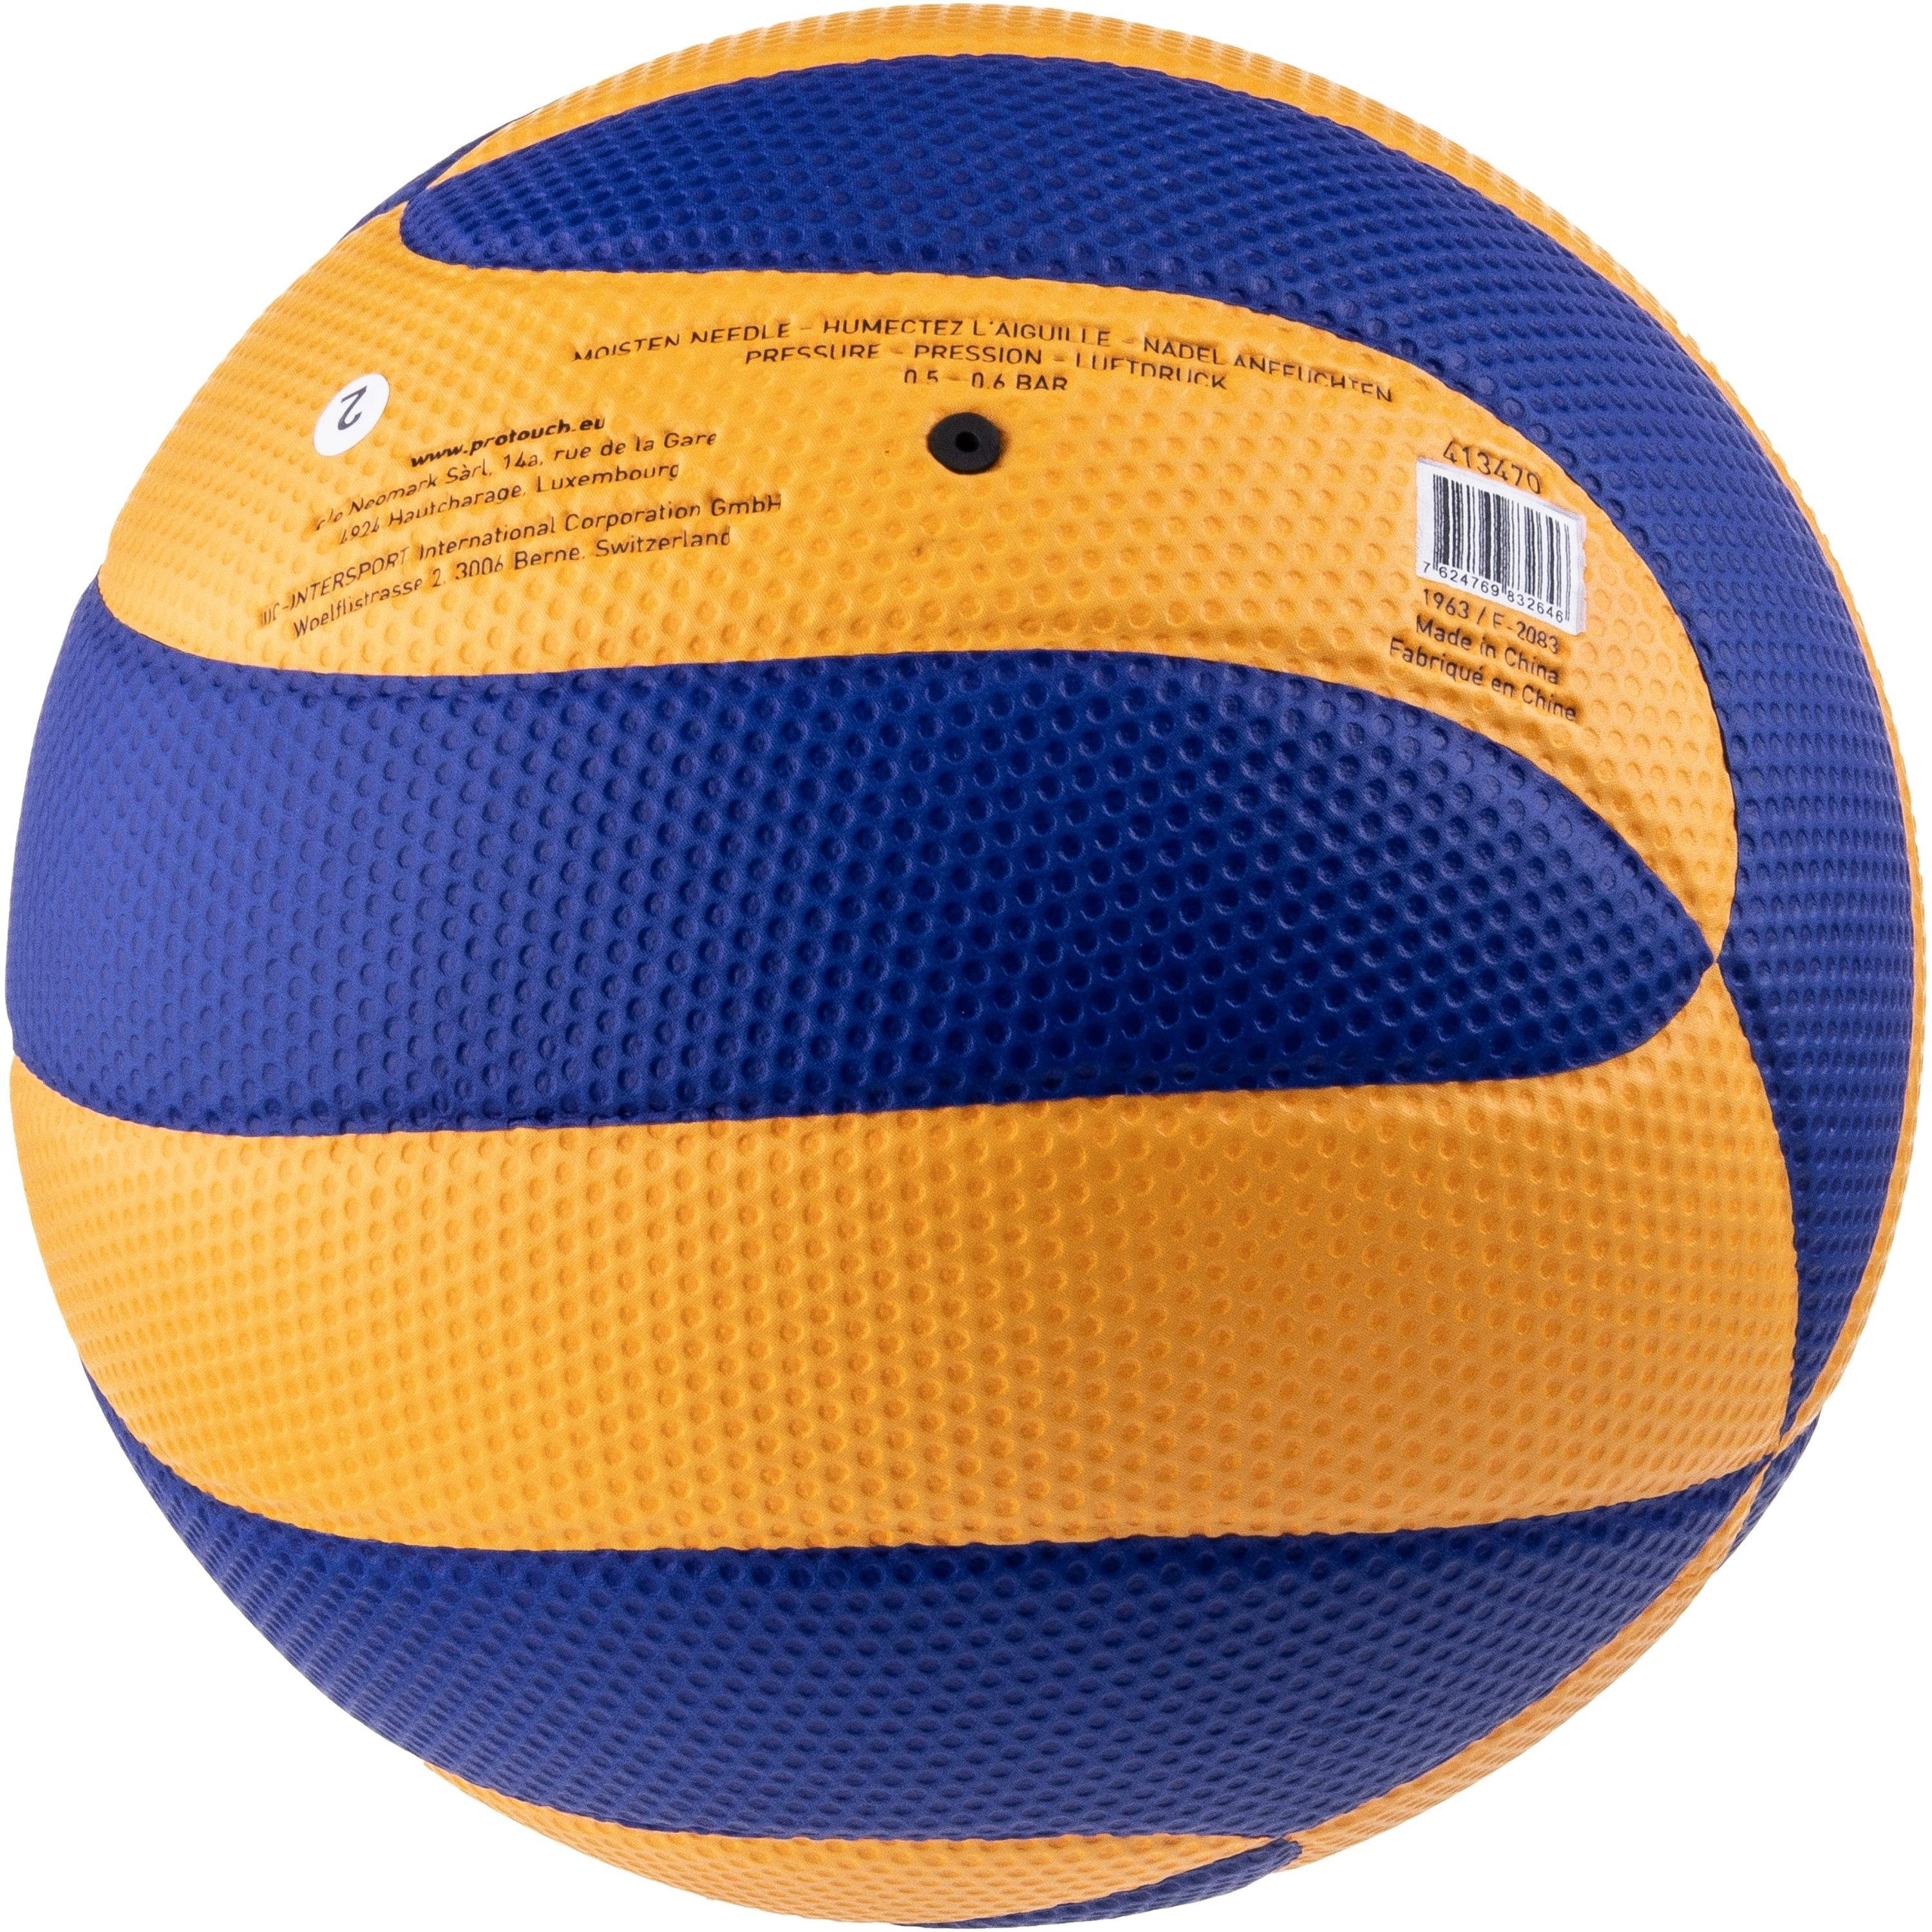 Volleyball Pro Touch 500 Spiko